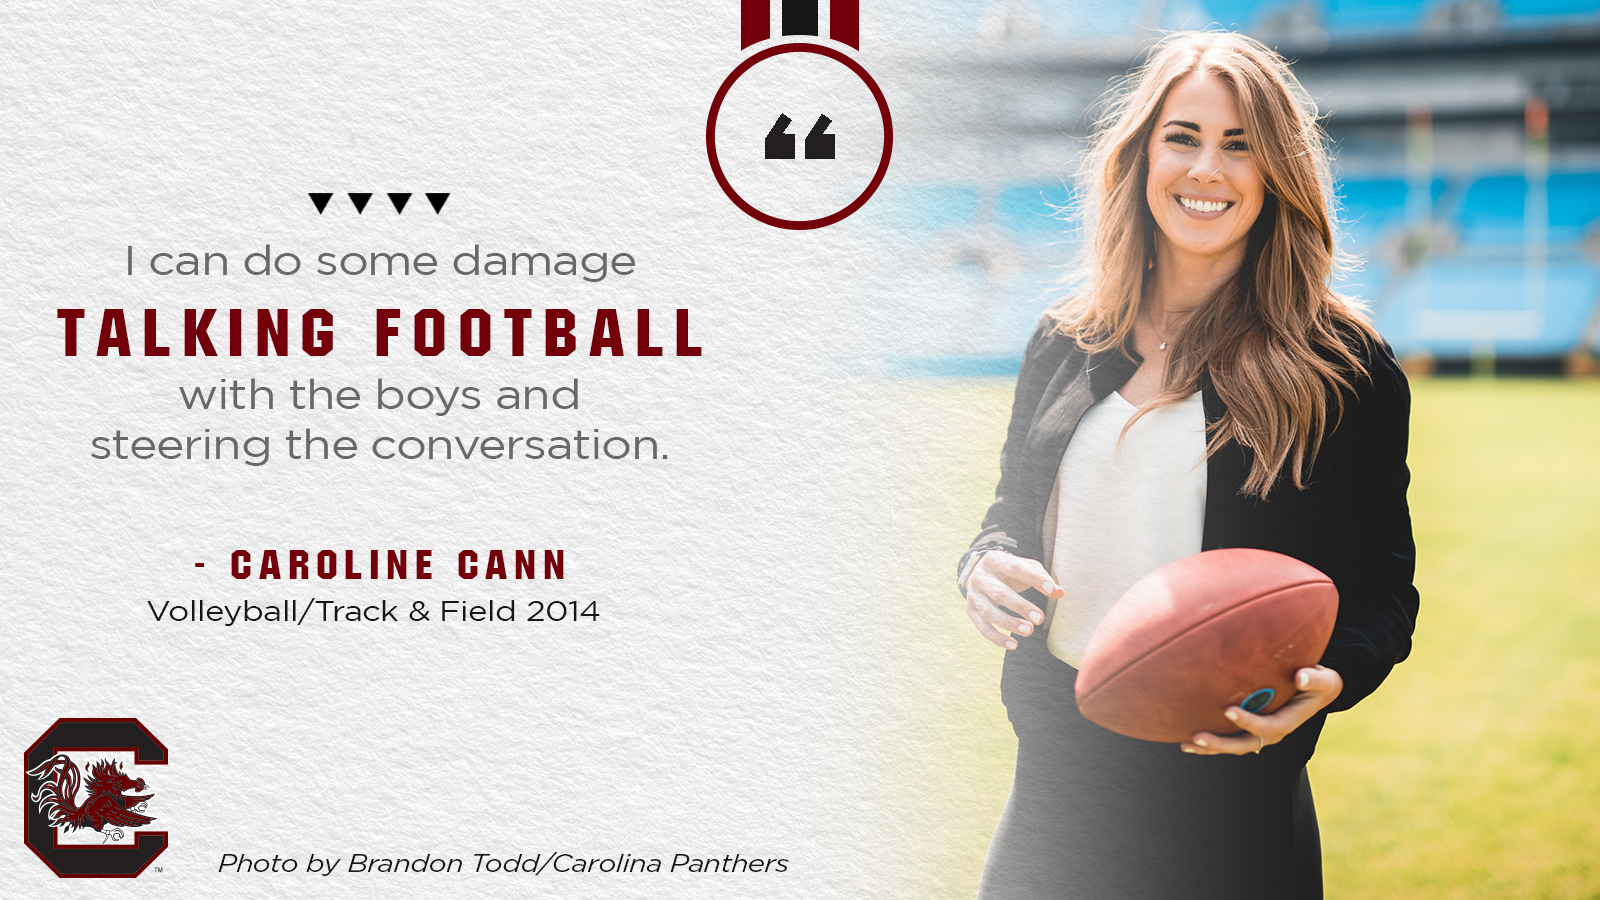 Former Gamecock Caroline Cann is Blazing a Trail in the NFL